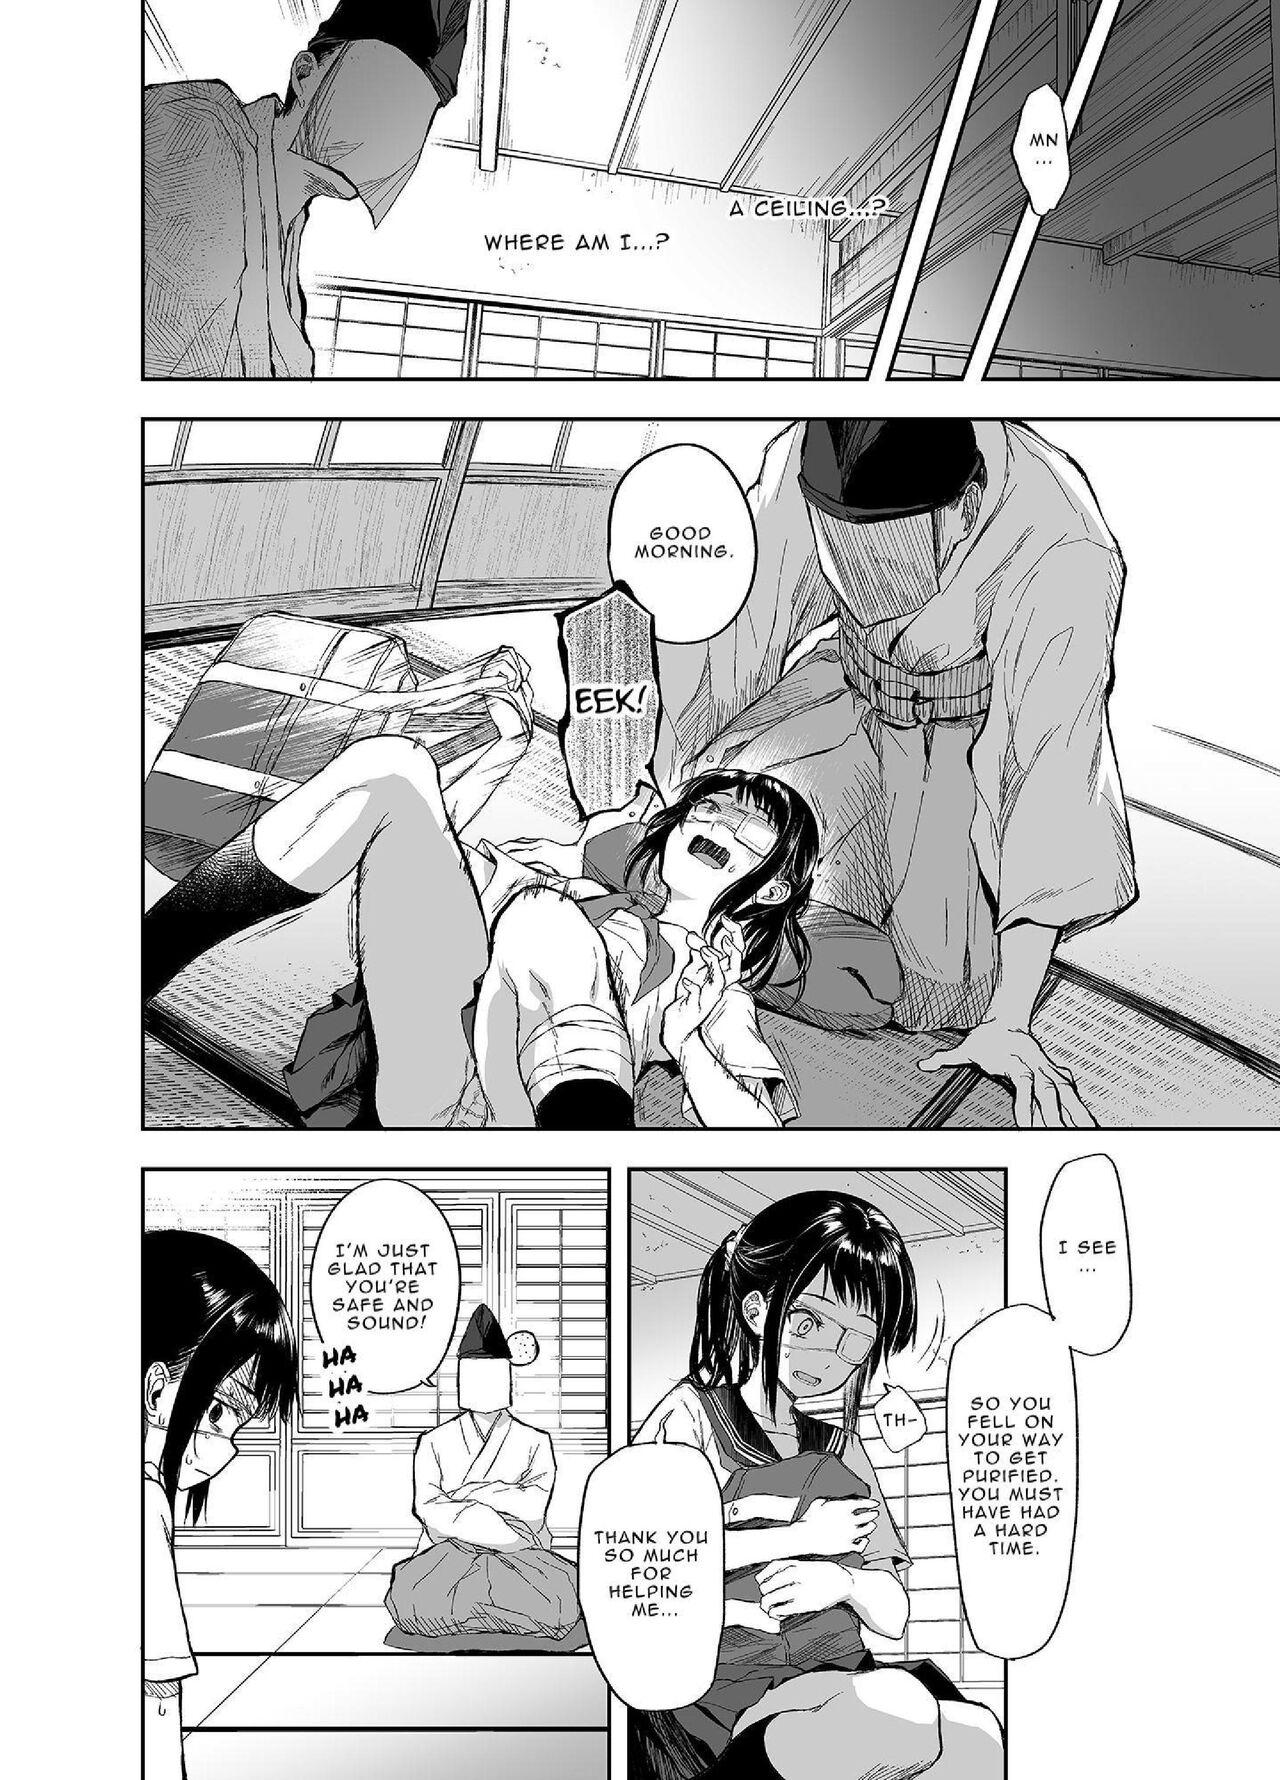 Foreplay The Ticklish Exorcism of a Possessed Girl - Original Bbc - Page 5